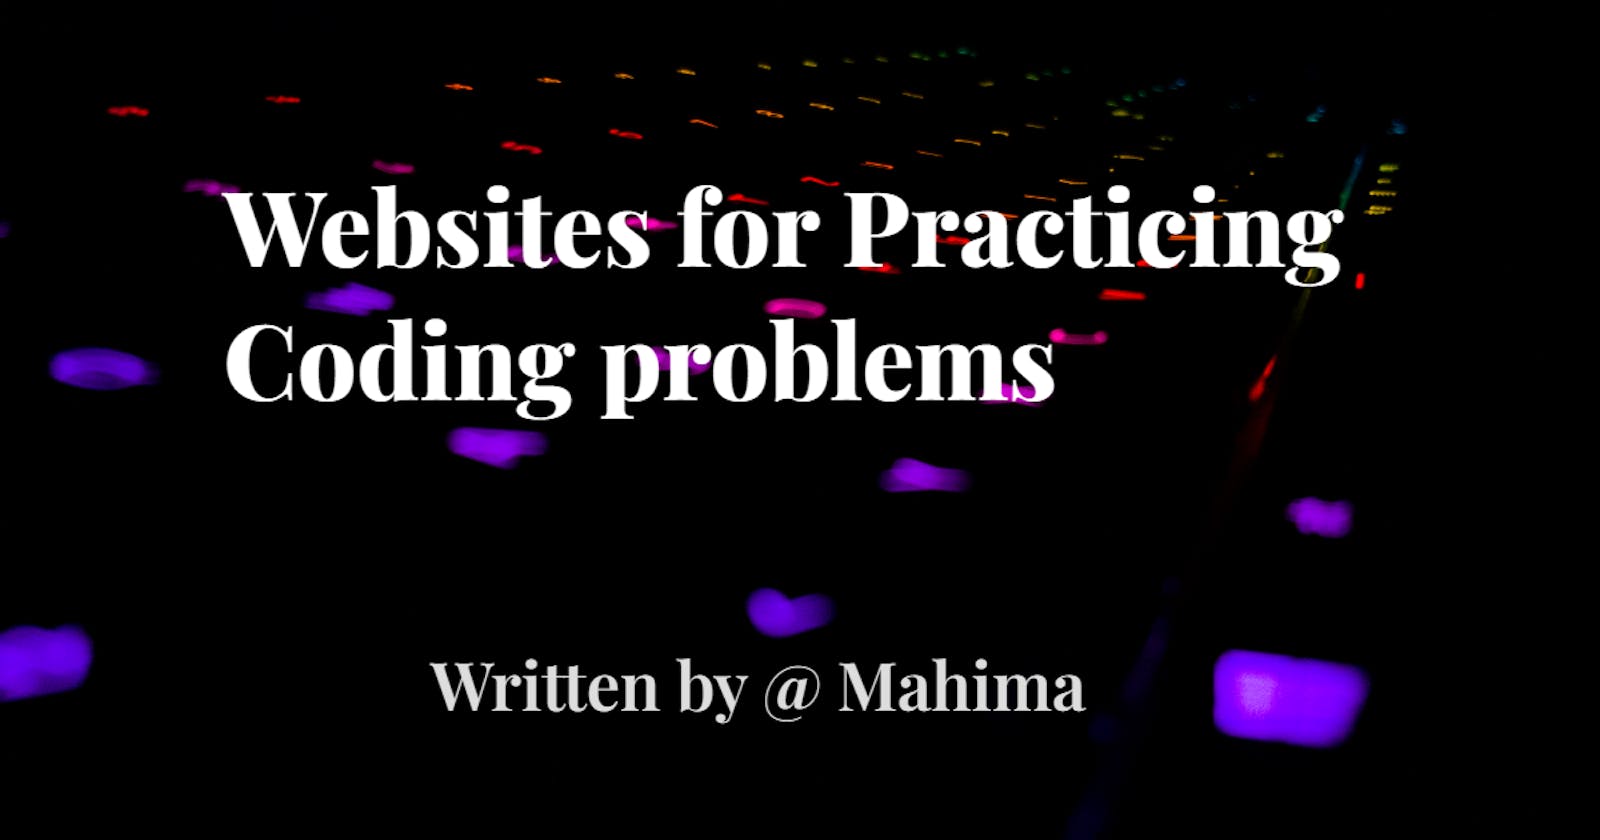 Websites for Practicing Coding problems